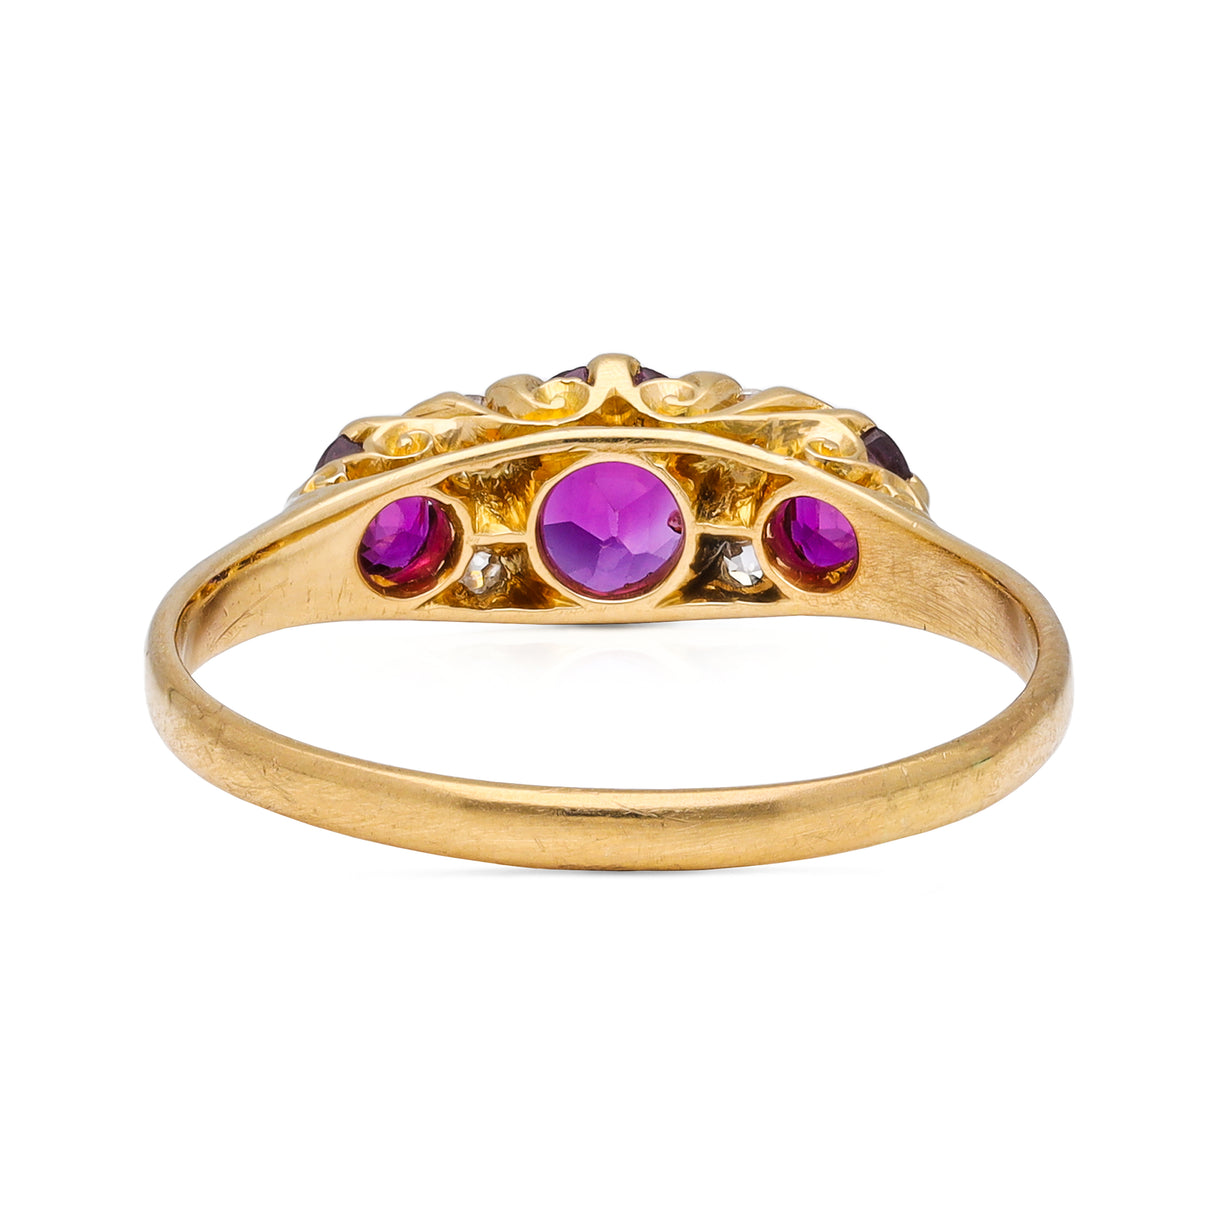 Antique Edwardian three stone ruby and diamond ring, rear view. 